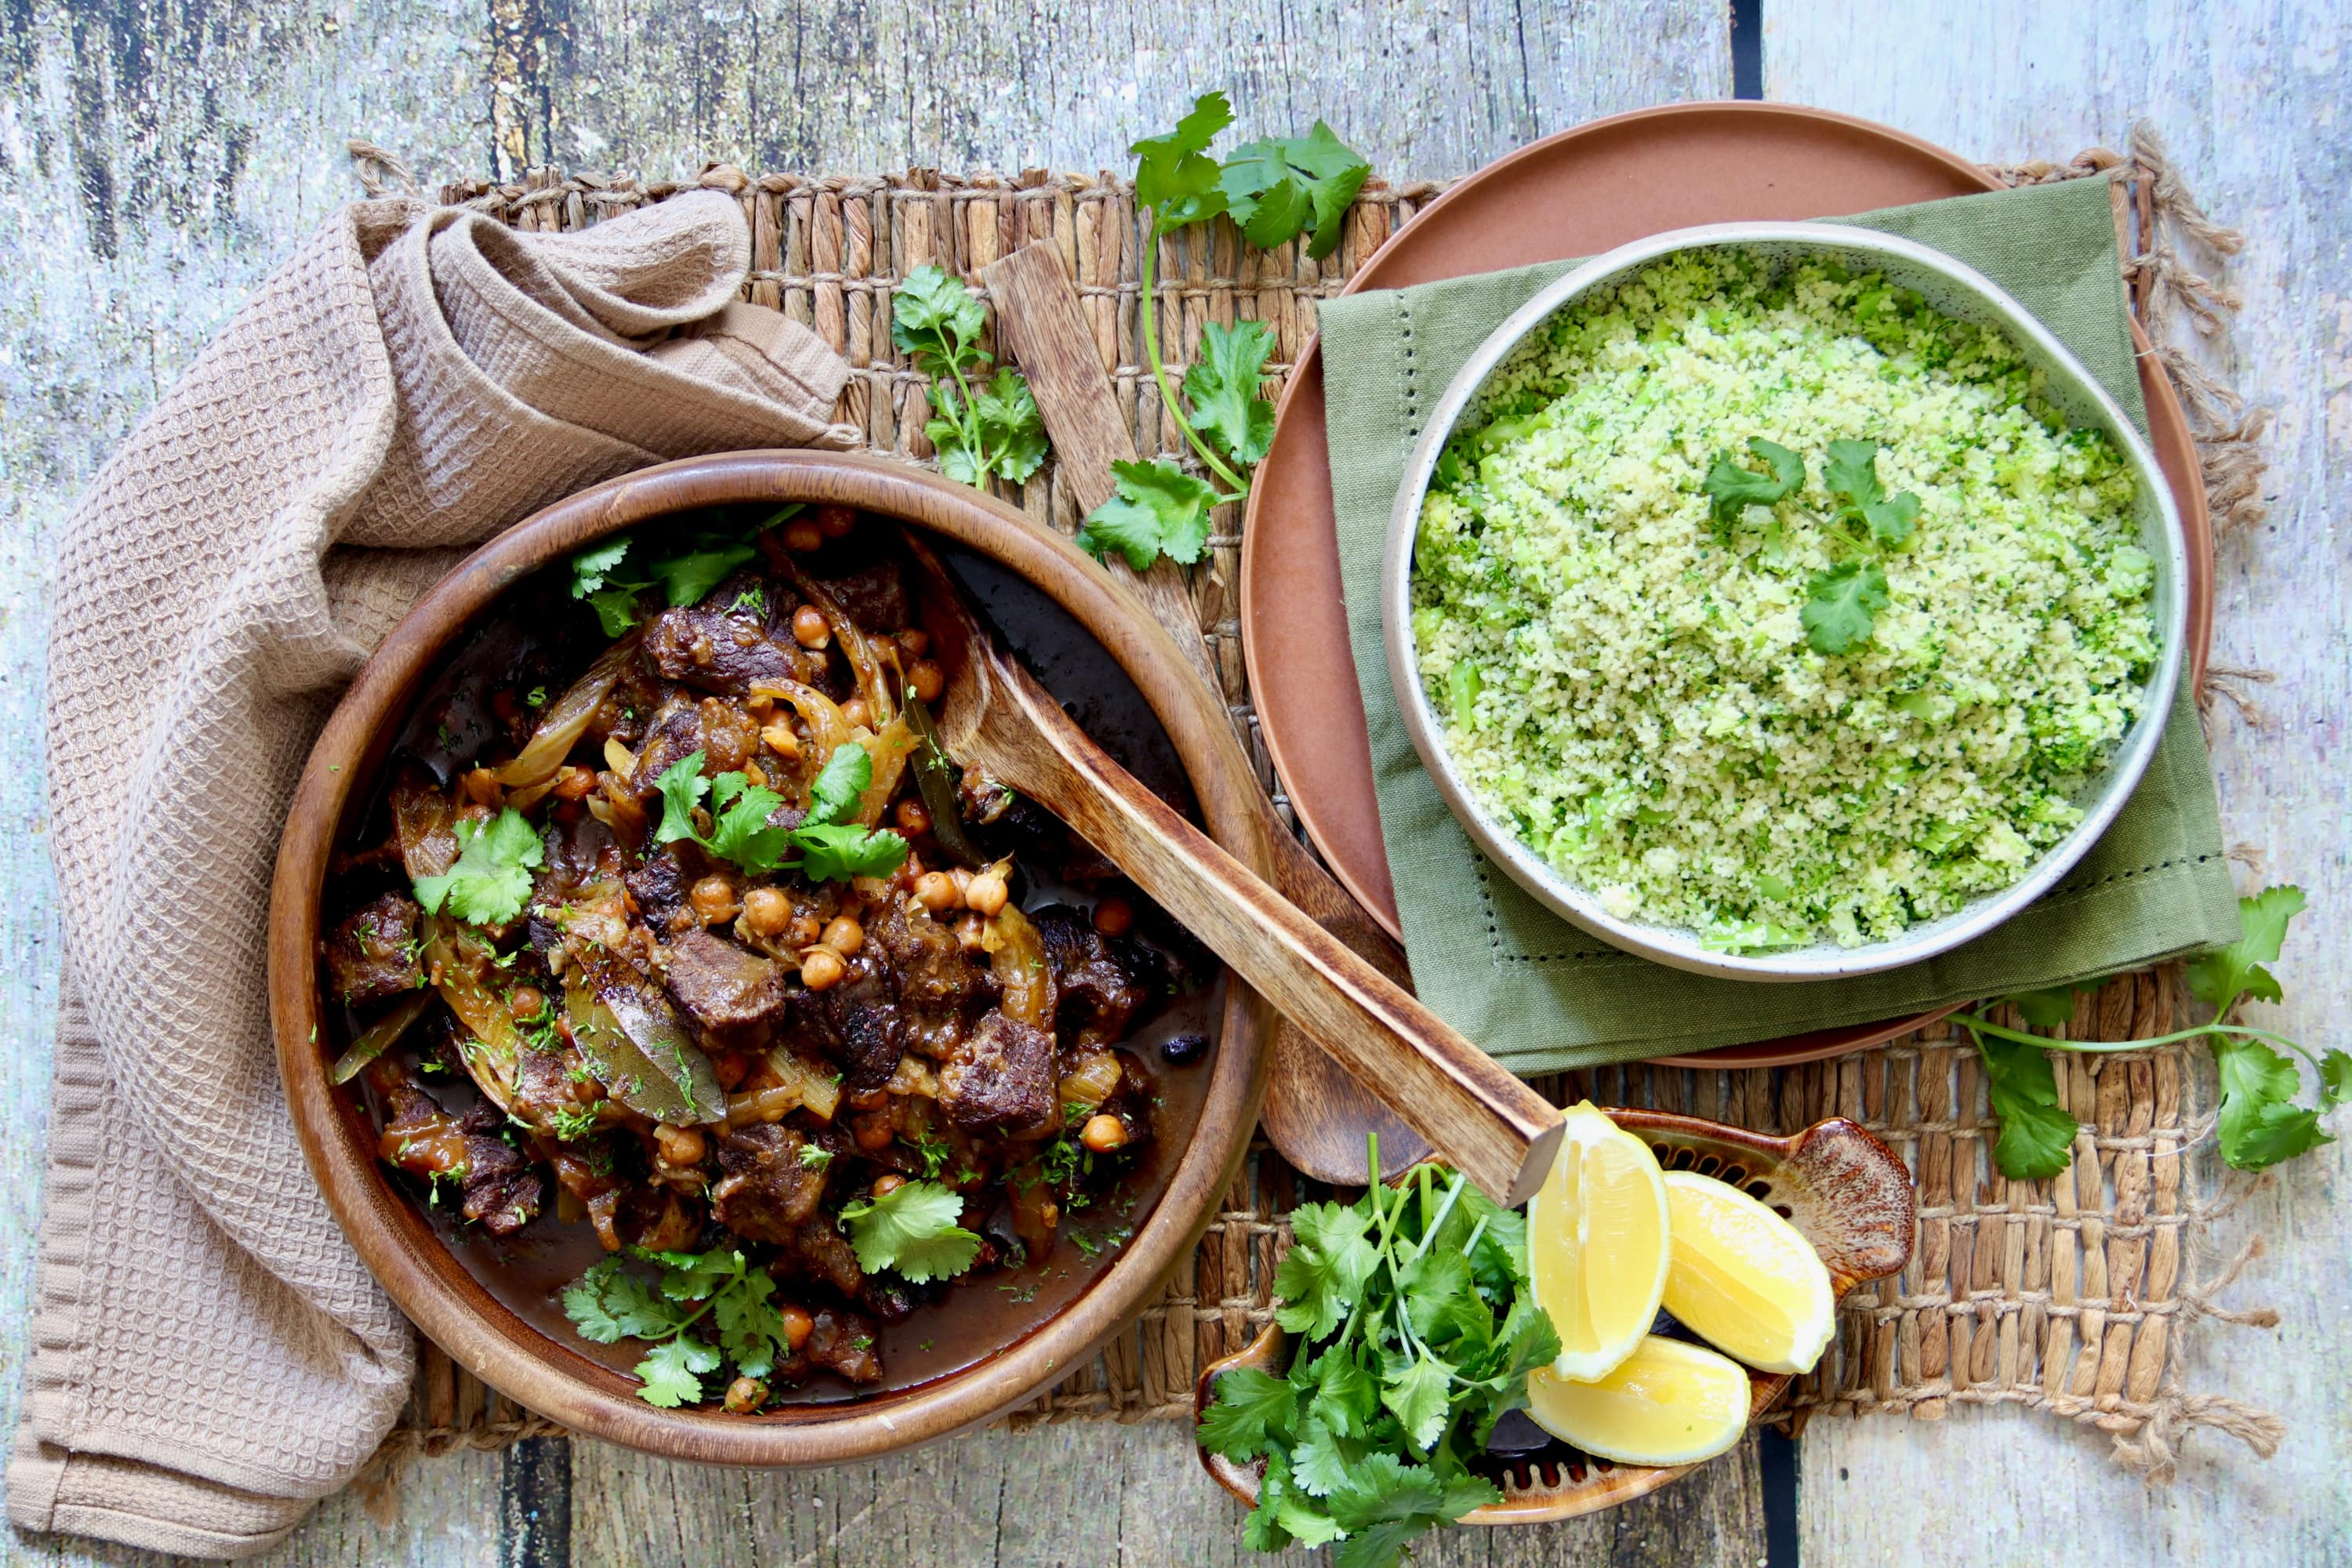 Middle Eastern slow cooked beef cheeks with broccoli and lemon couscous.